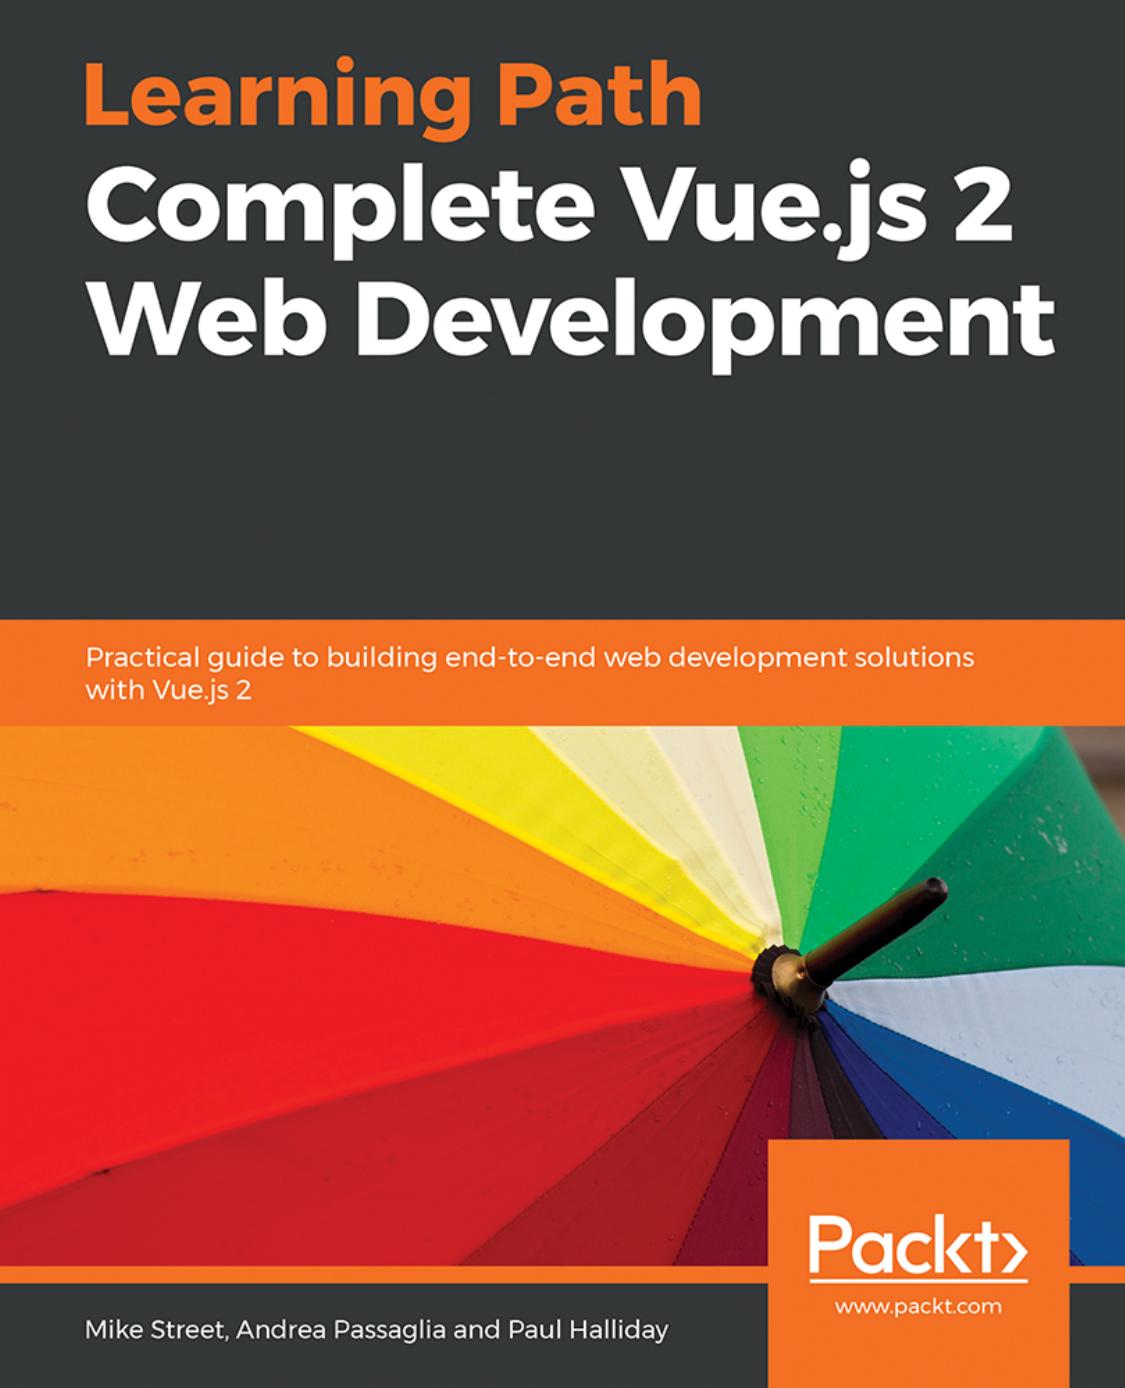 Complete Vue.js 2 Web Development: Practical Guide to Building End-To-End Web Development Solutions With Vue.js 2